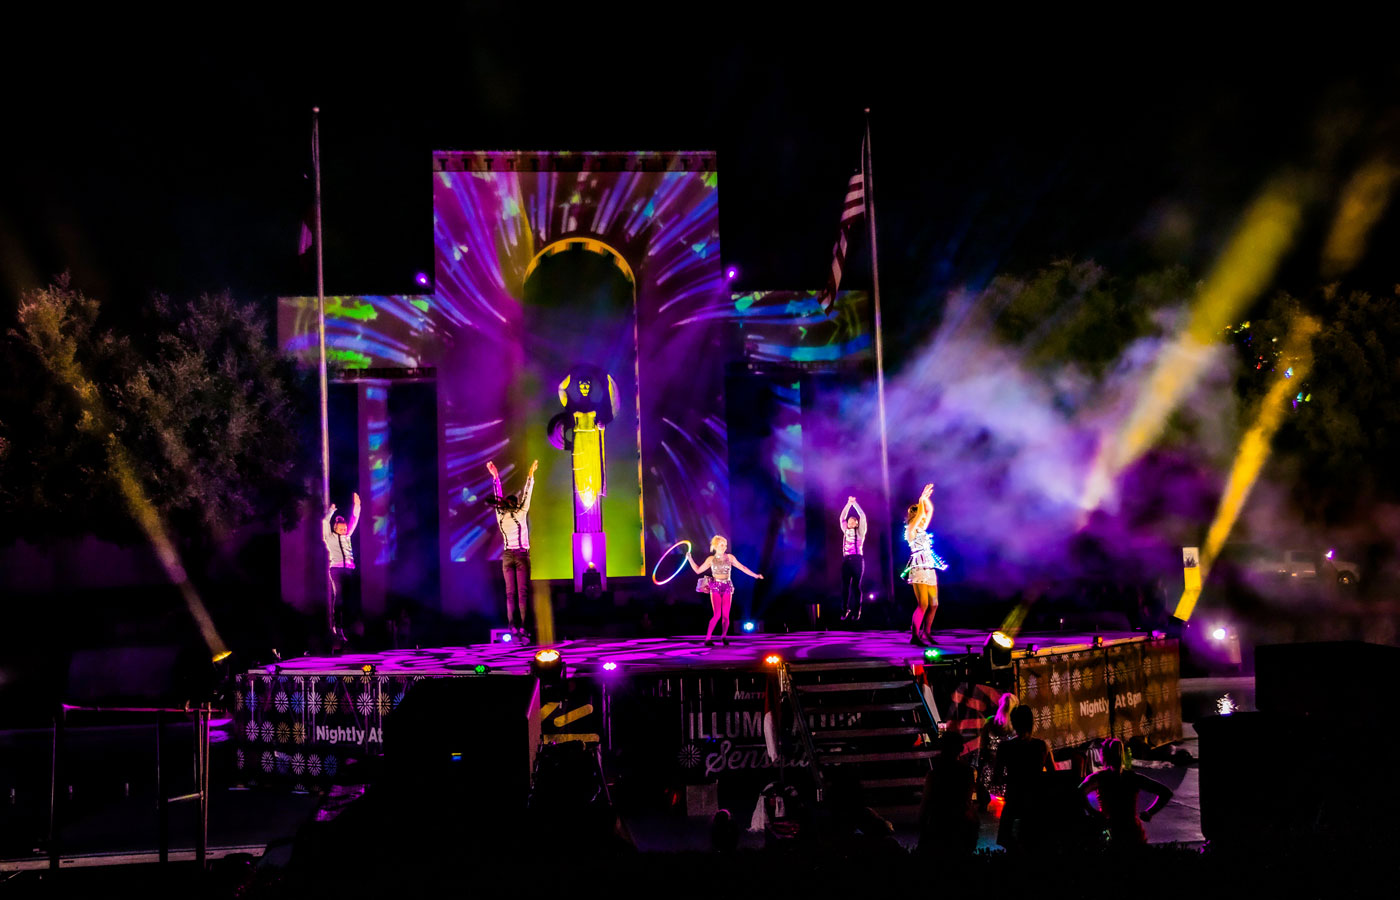 Stage design, lighting, audio visual production for the State Fair of Texas by Onstage Systems